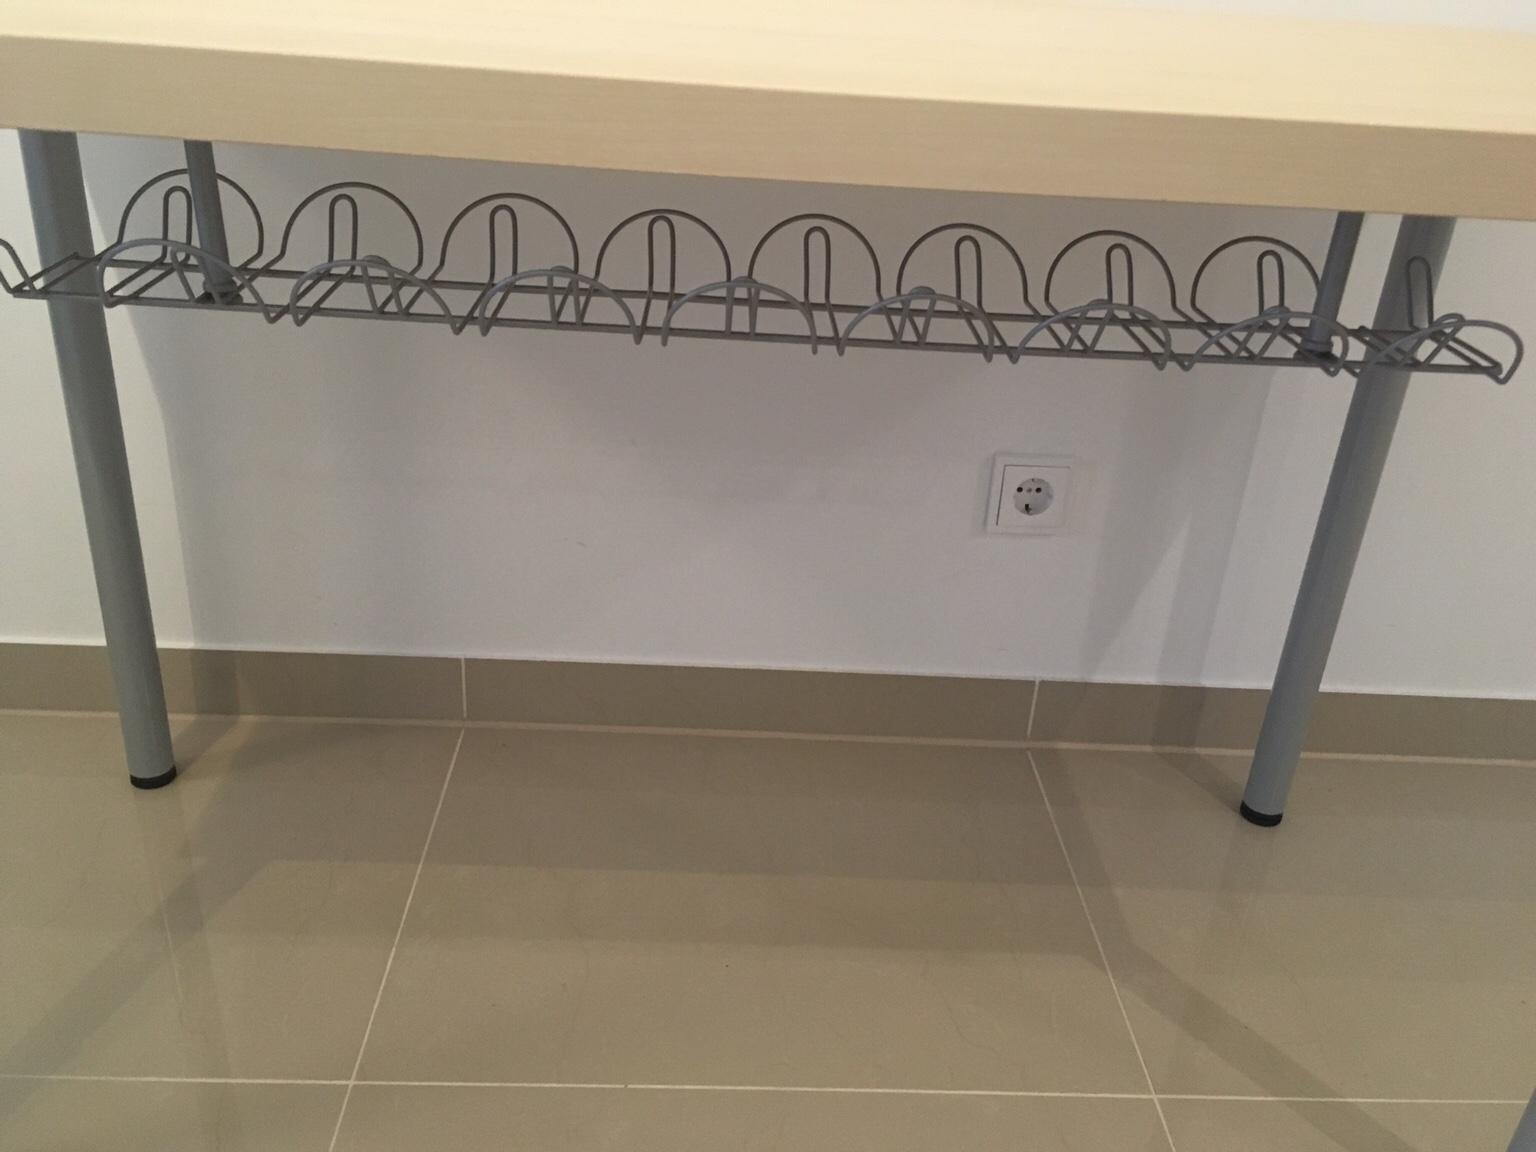 Desk With Cable Trunking In 10115 Mitte For 20 00 For Sale Shpock